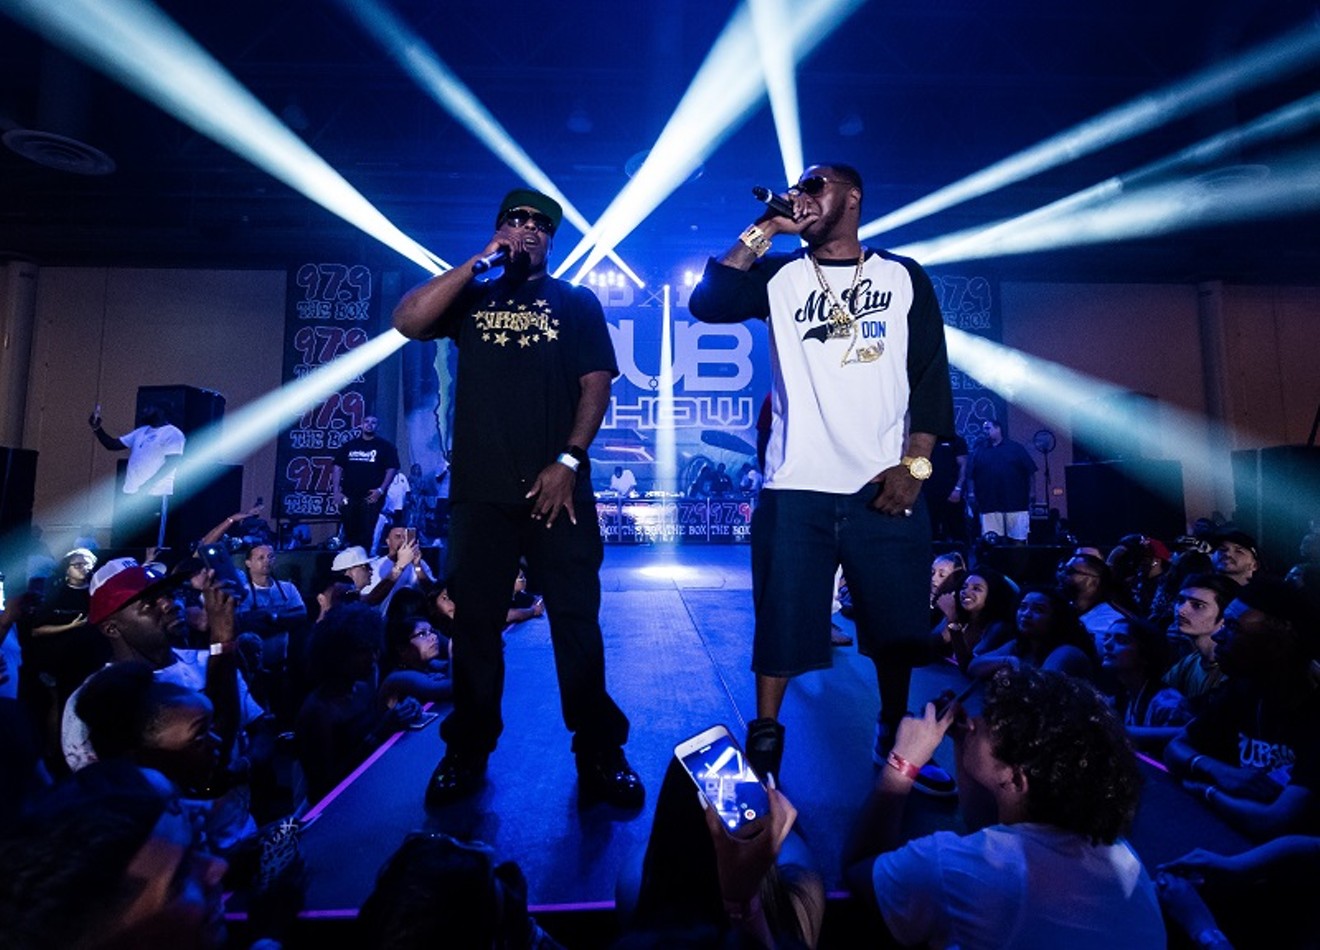 Z-Ro (right), seen performing at the Monster Energy DUB show in August, now faces up to a year in jail on a misdemeanor assault charge.